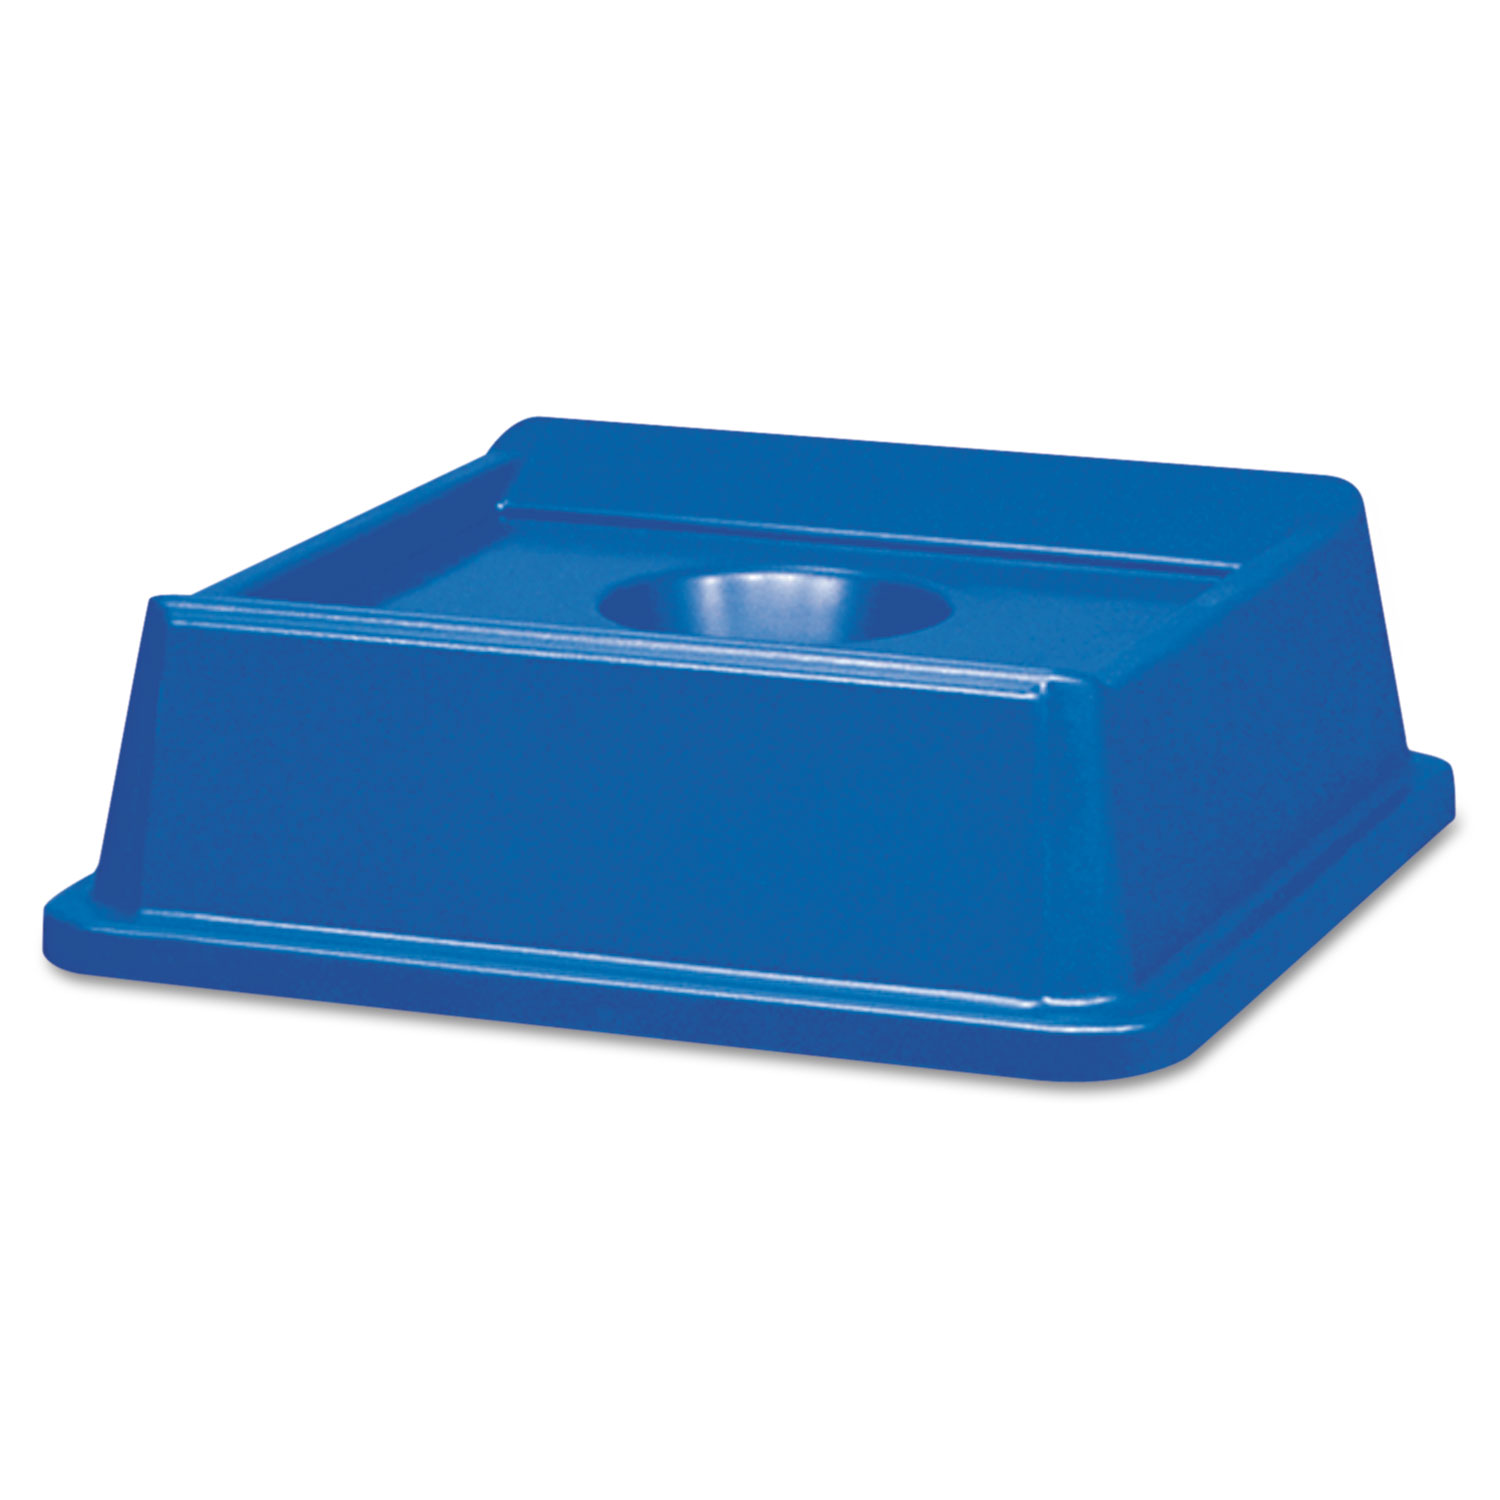  Rubbermaid Commercial 279100DBLUE Untouchable Bottle and Can Recycling Top, Square, 20.13w x 20.13d x 6.25h, Blue (RCP2791BLU) 